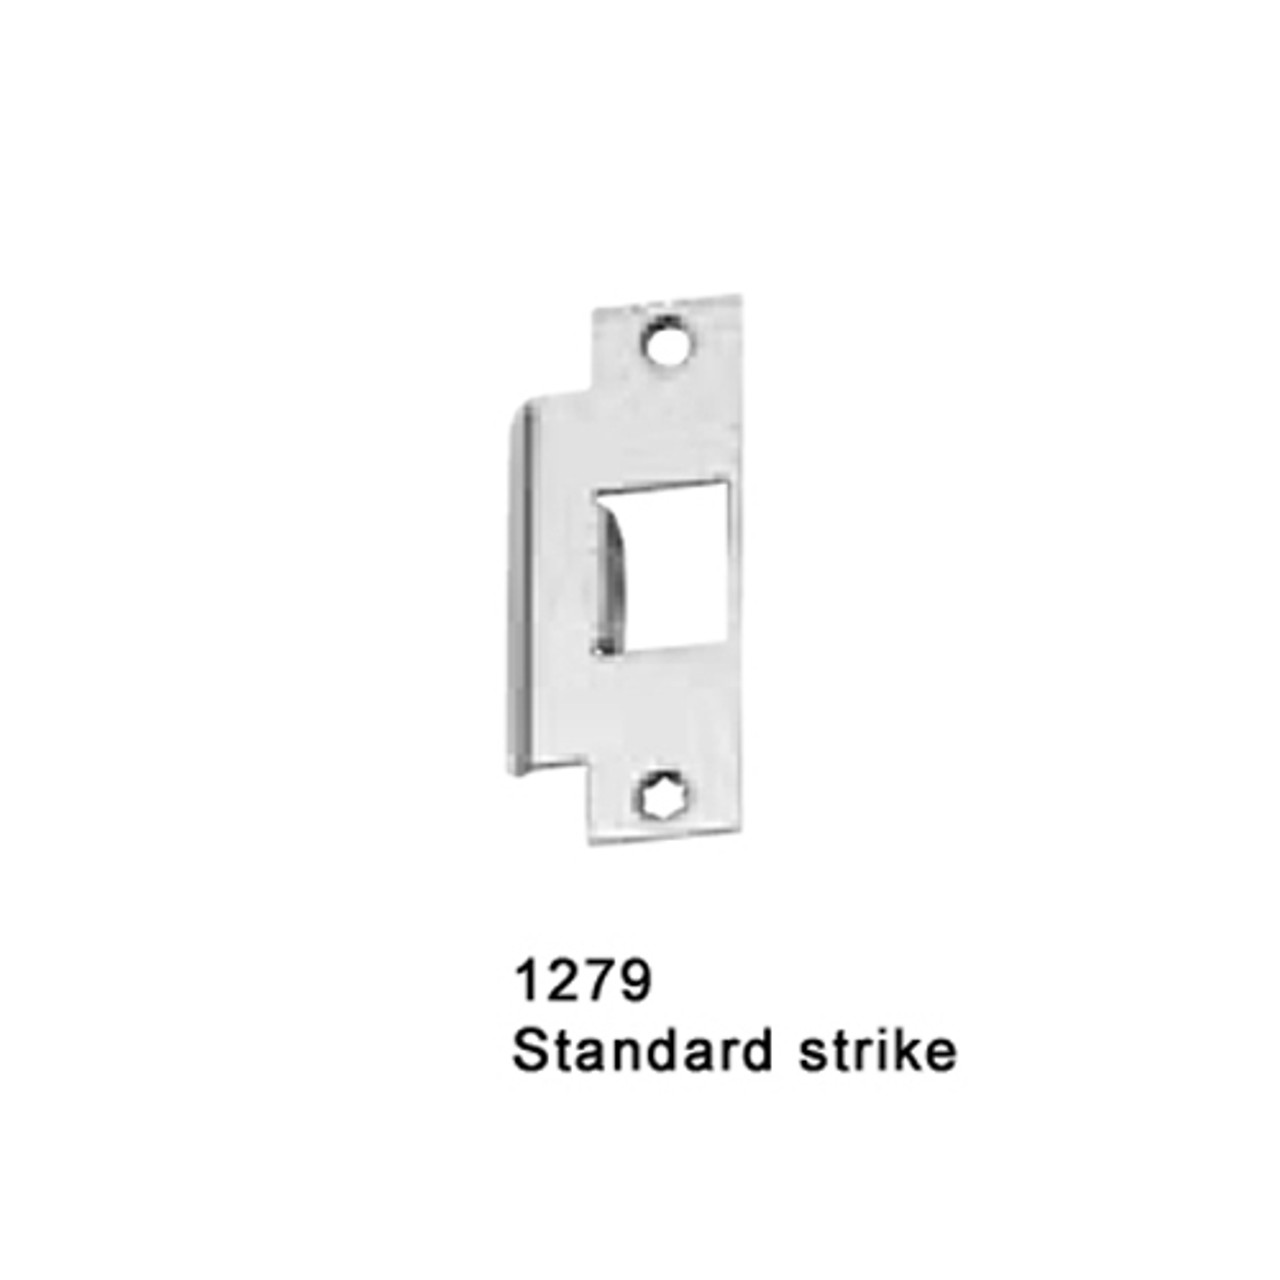 CD25-M-EO-US32-3-RHR Falcon 25 Series Exit Only Mortise Lock Devices in Polished Stainless Steel